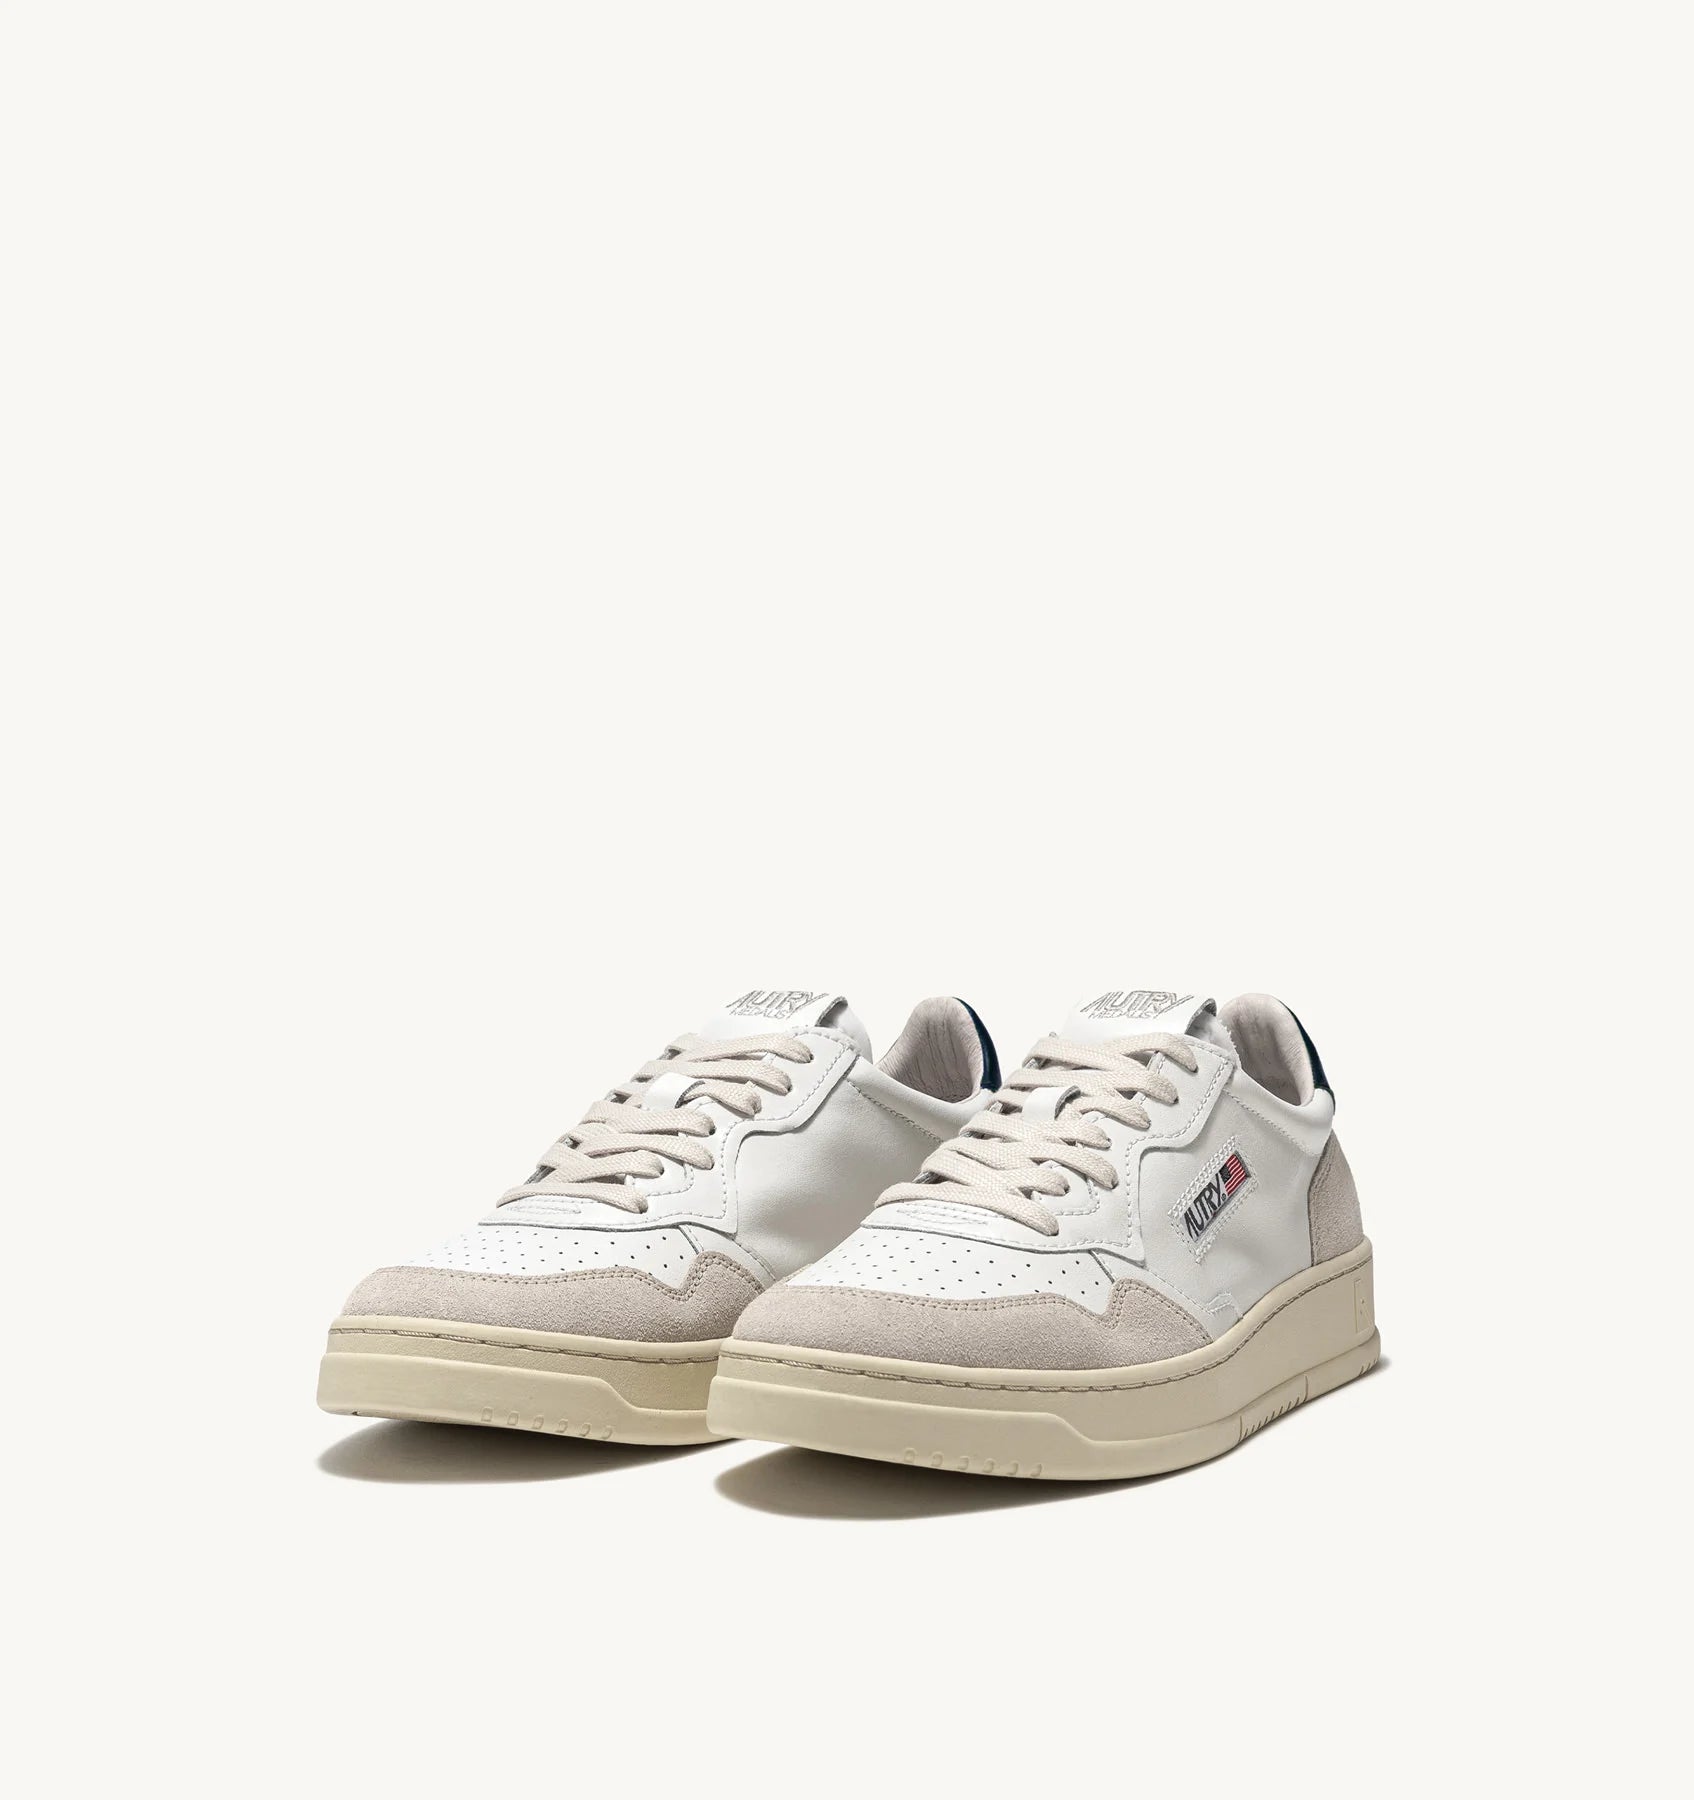 Autry Medalist Low Sneakers in Suede and Leather White and Navy - Den Lille Ida - Autry